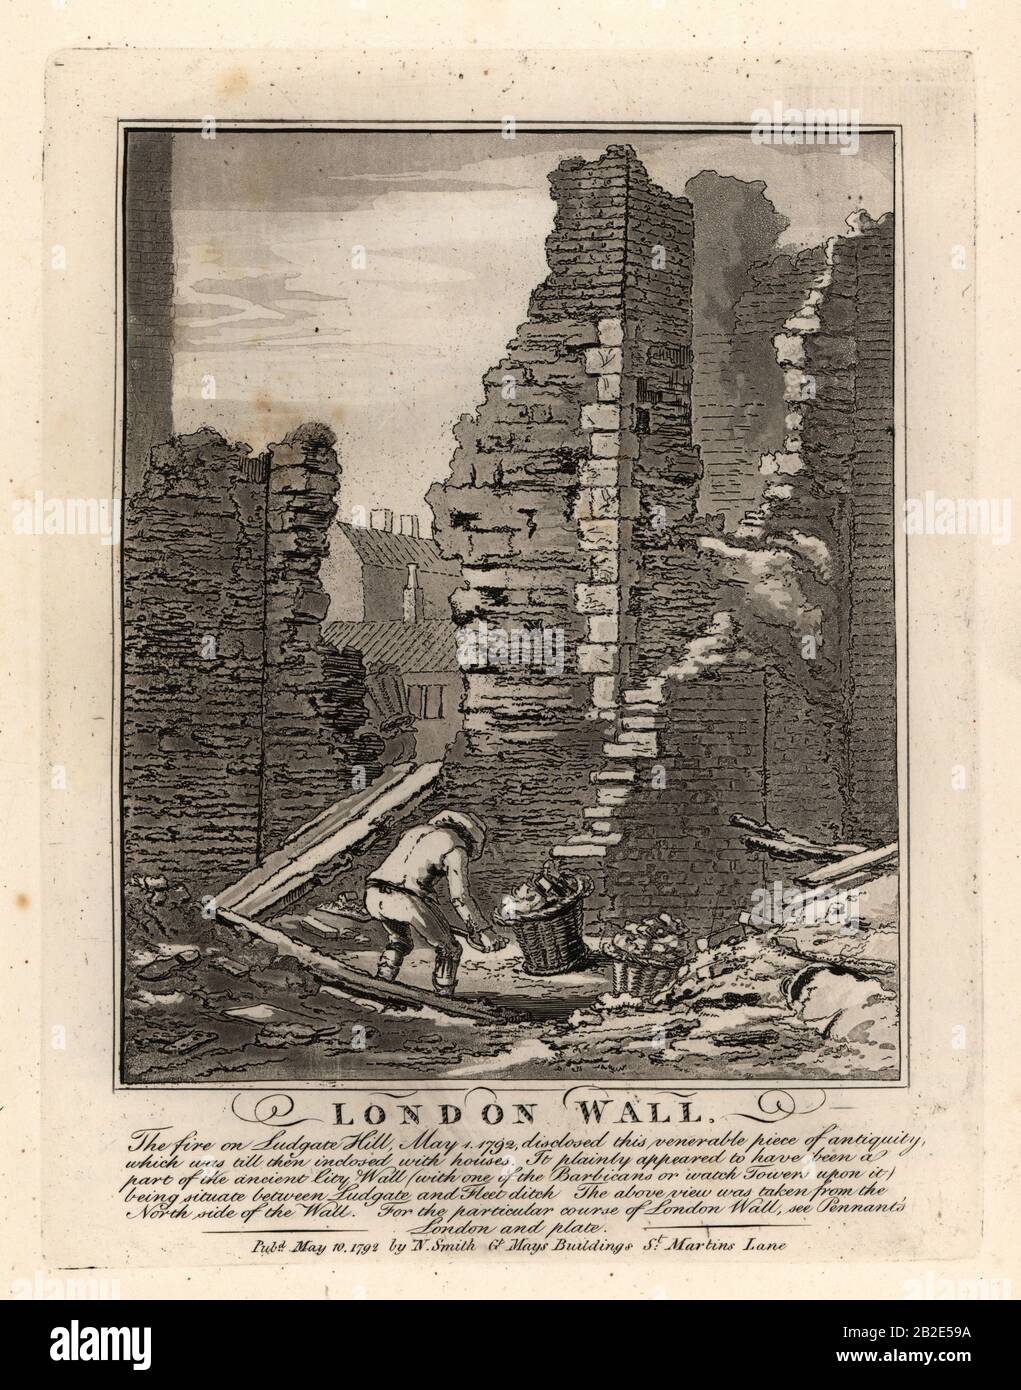 Ruins of the Roman London Wall exposed by the fire of May 1792 on Ludgate Hill. Copperplate engraving by John Thomas Smith after original drawings by members of the Society of Antiquaries from his J.T. Smith’s Antiquities of London and its Environs, J. Sewell, R. Folder, J. Simco, London, 1792. Stock Photo